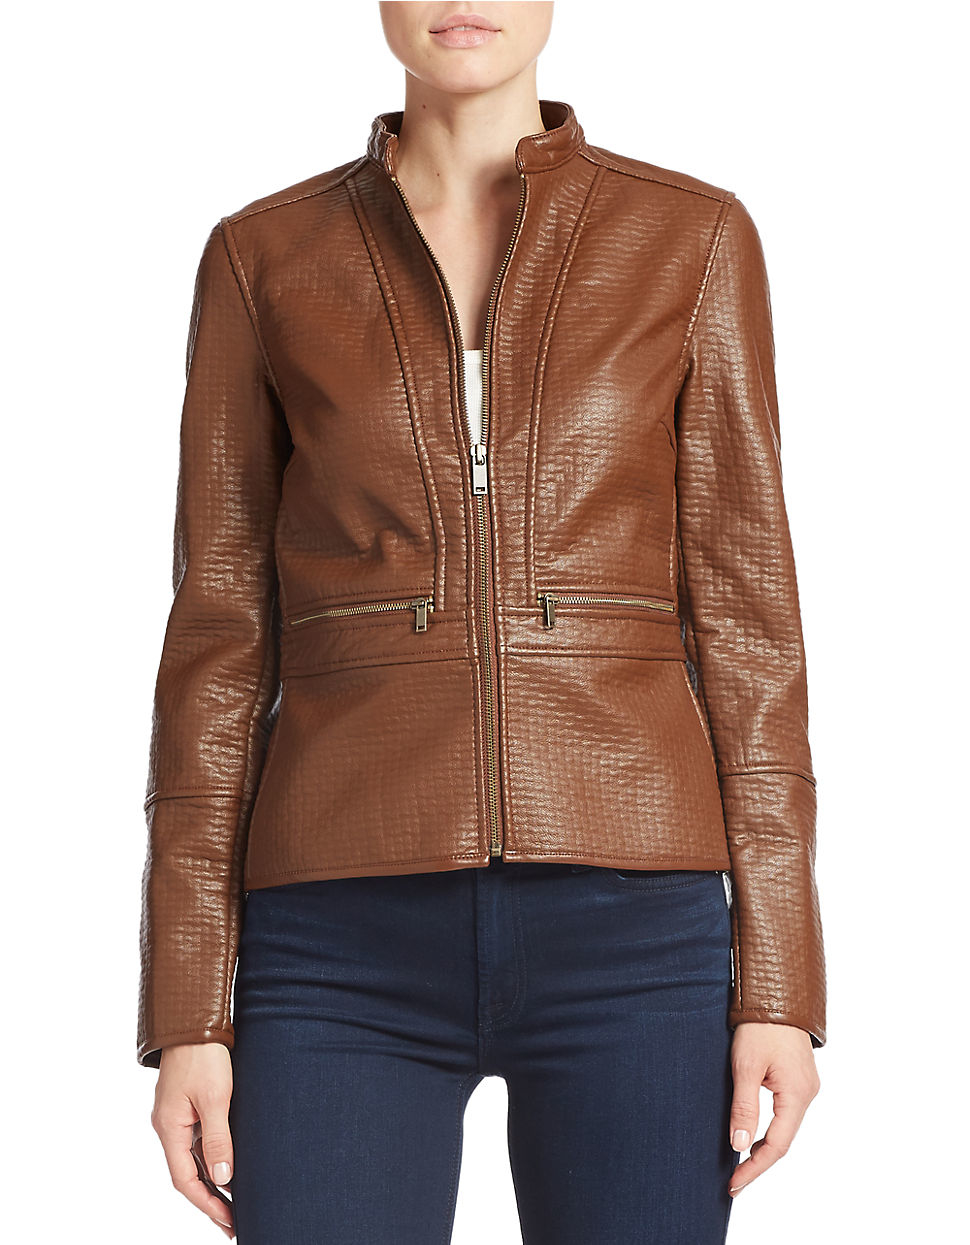 Know CemSim: Lord And Taylor Leather Jacket